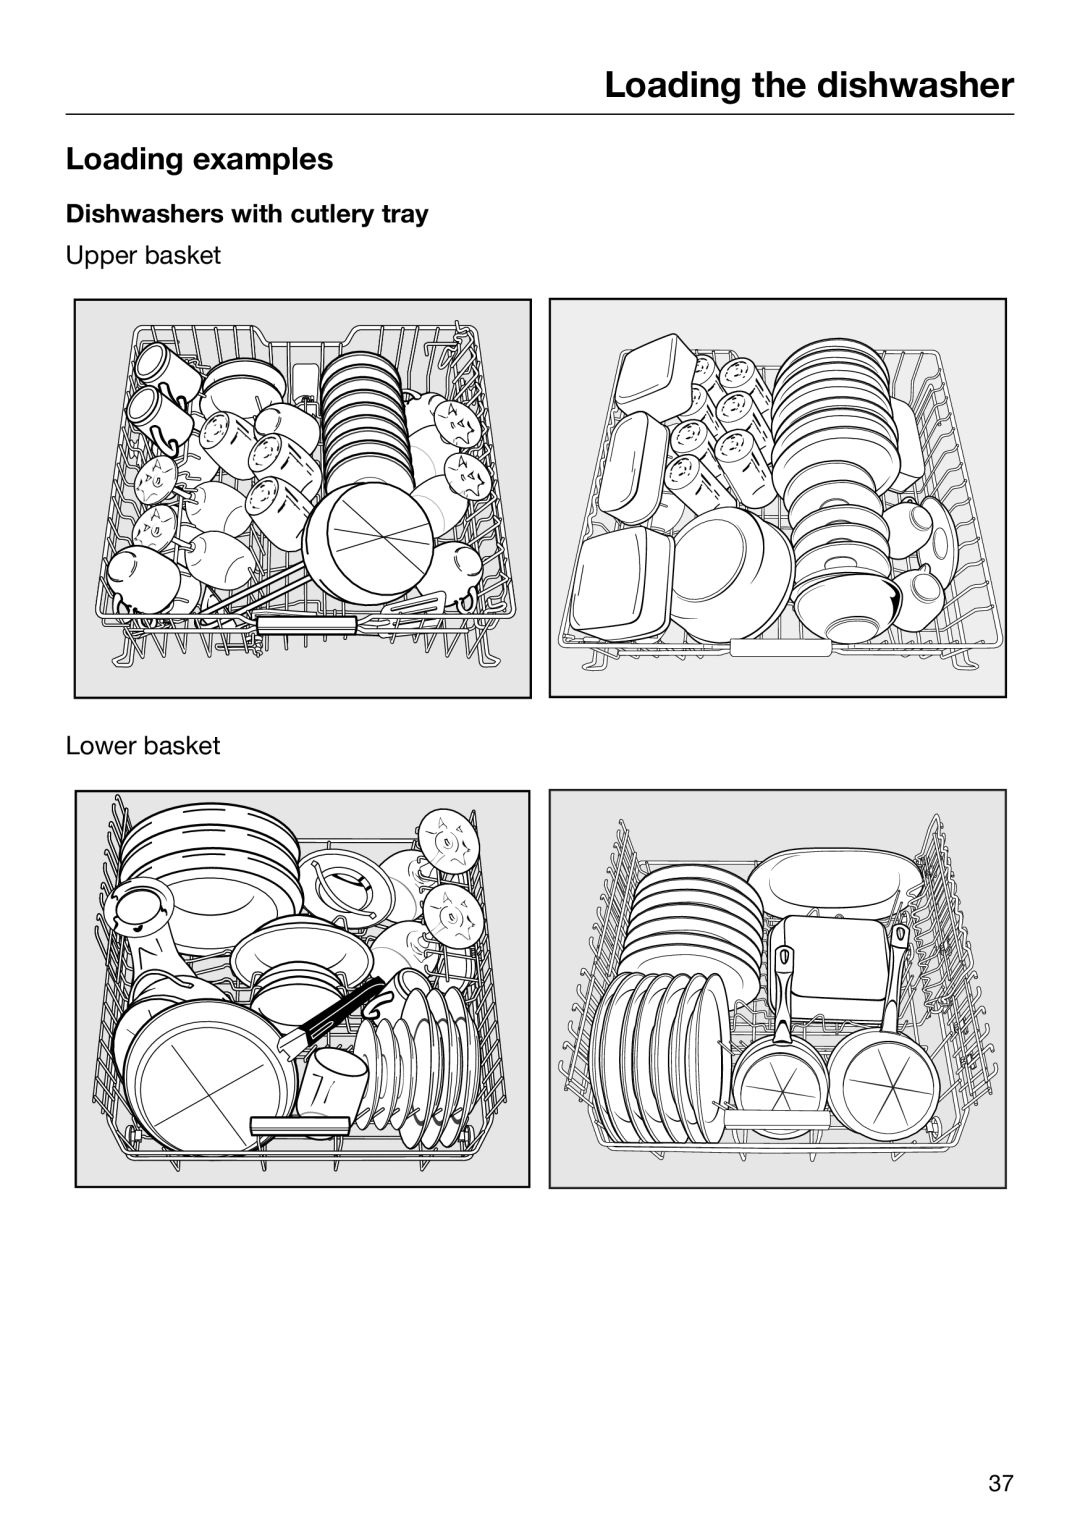 Miele 09 645 470 manual Loading examples, Loading the dishwasher, Dishwashers with cutlery tray 